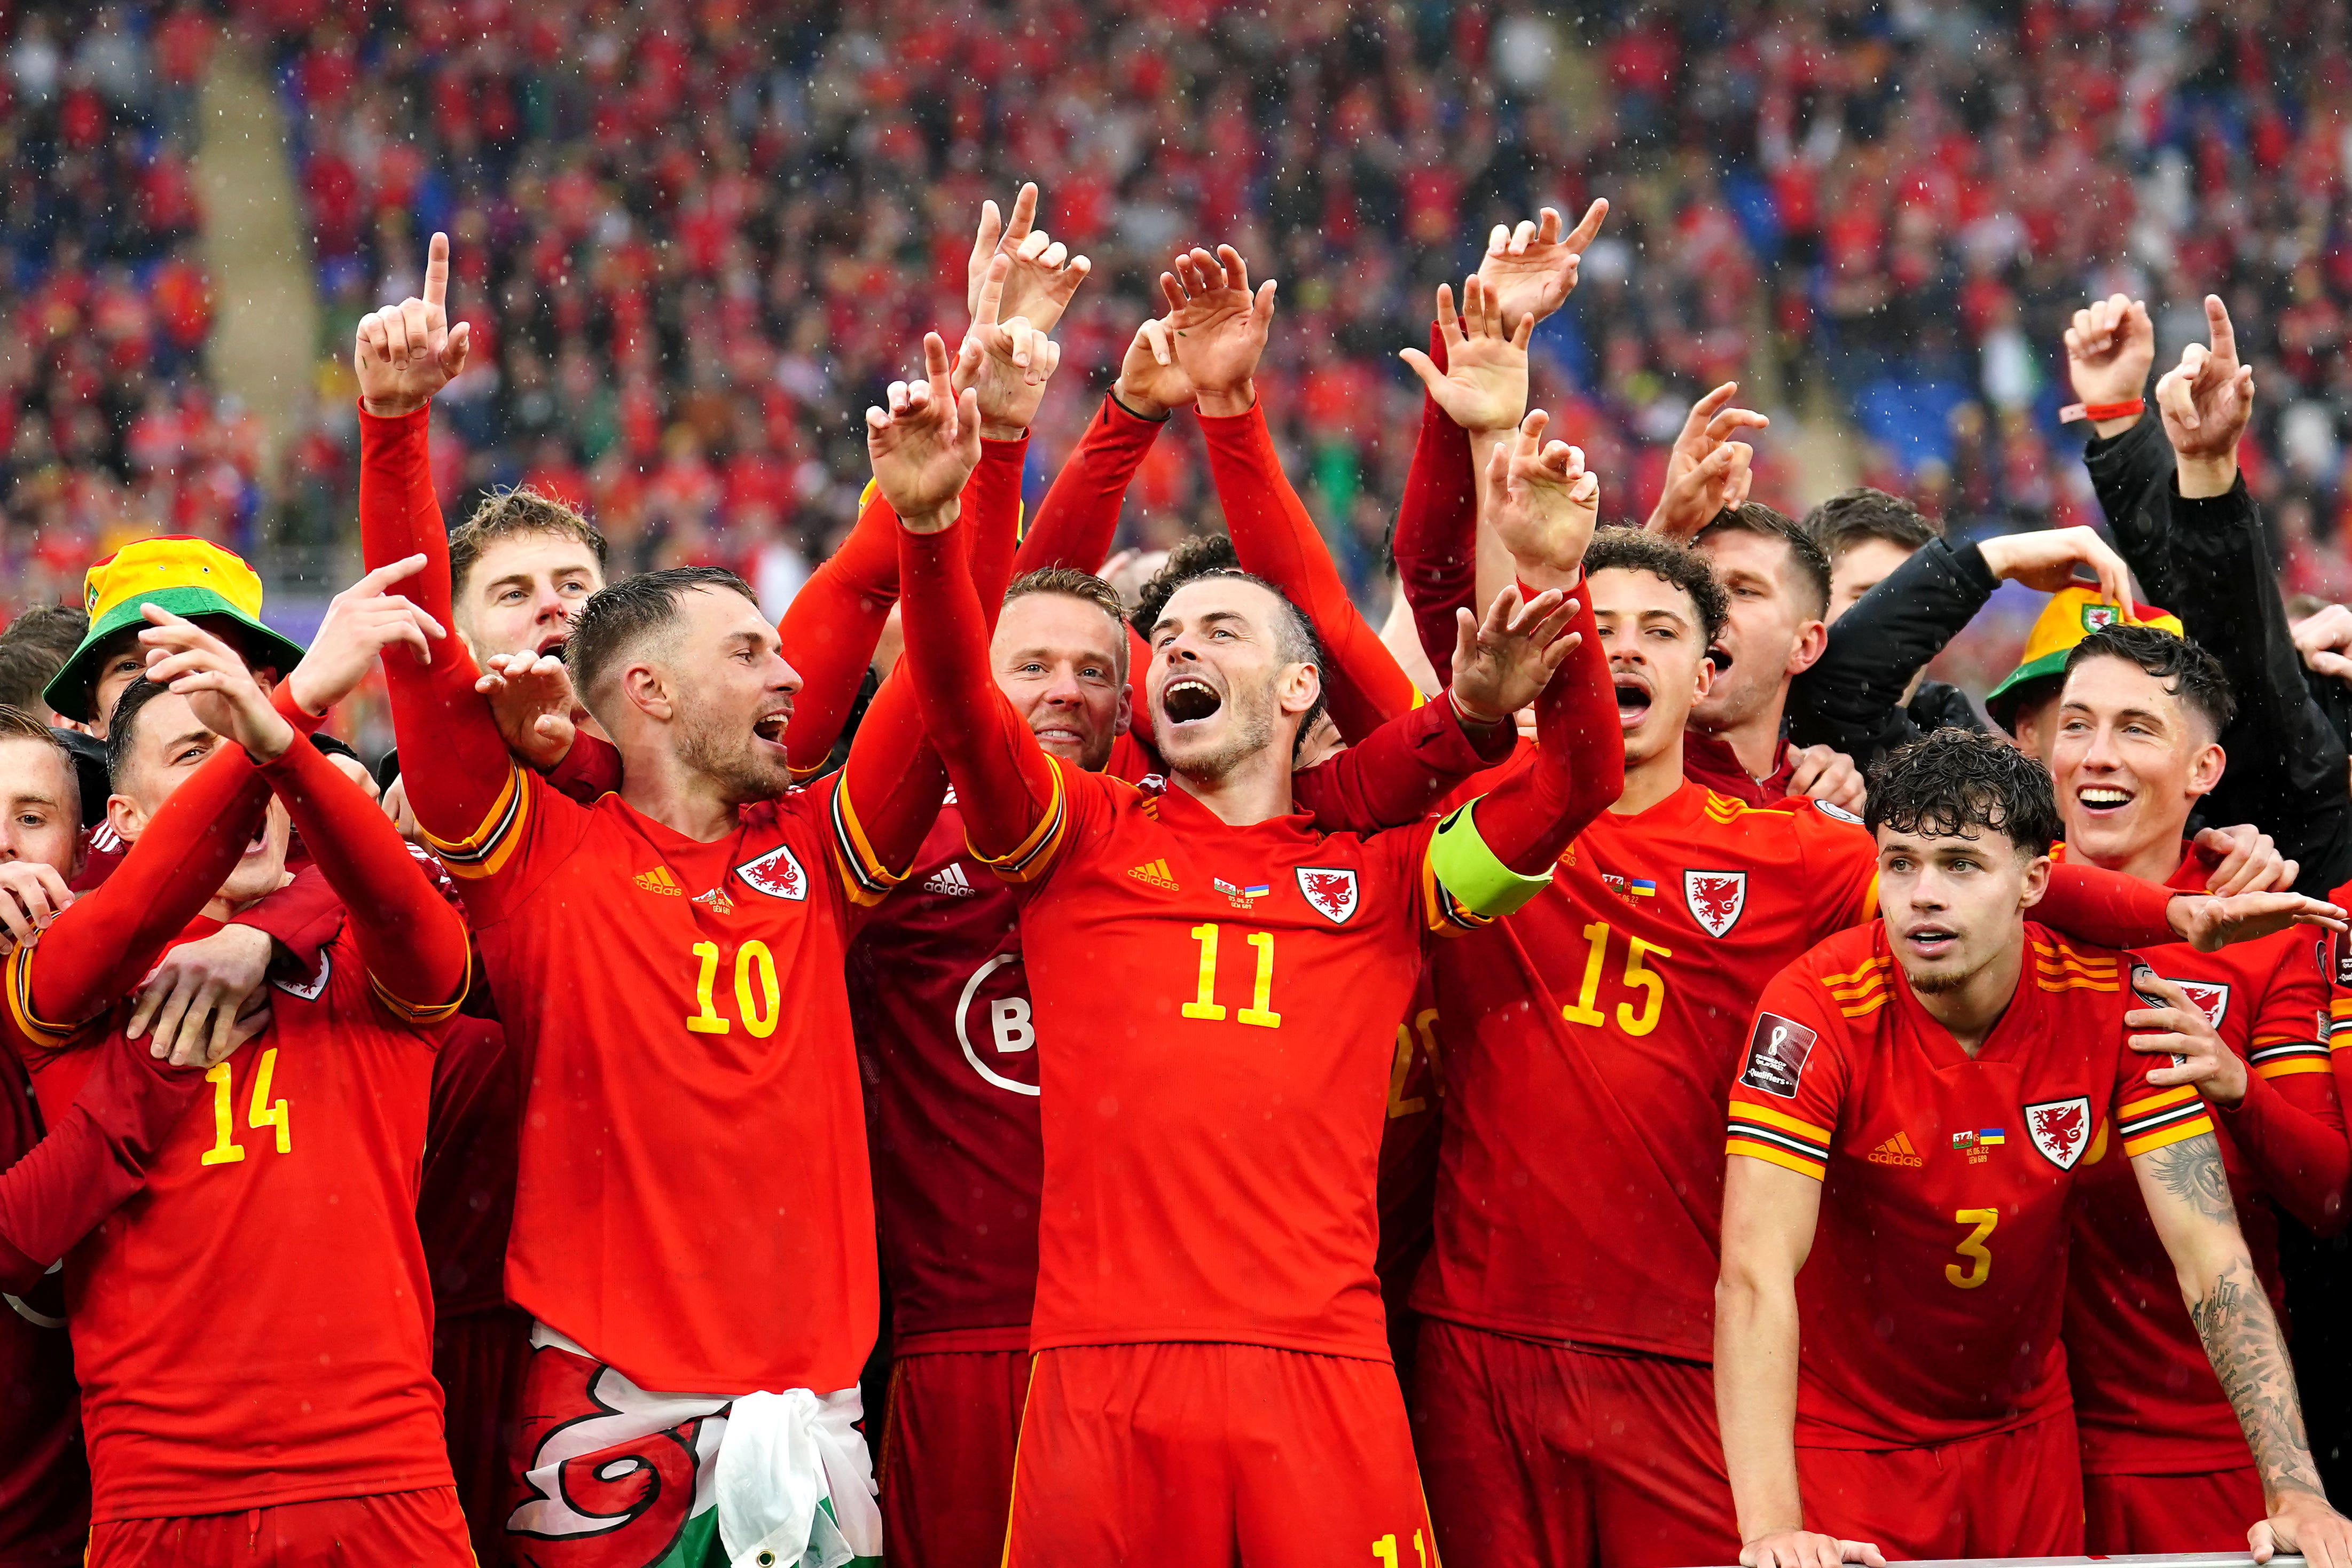 Wales are heading to their first World Cup since 1958 (David Davies/PA)